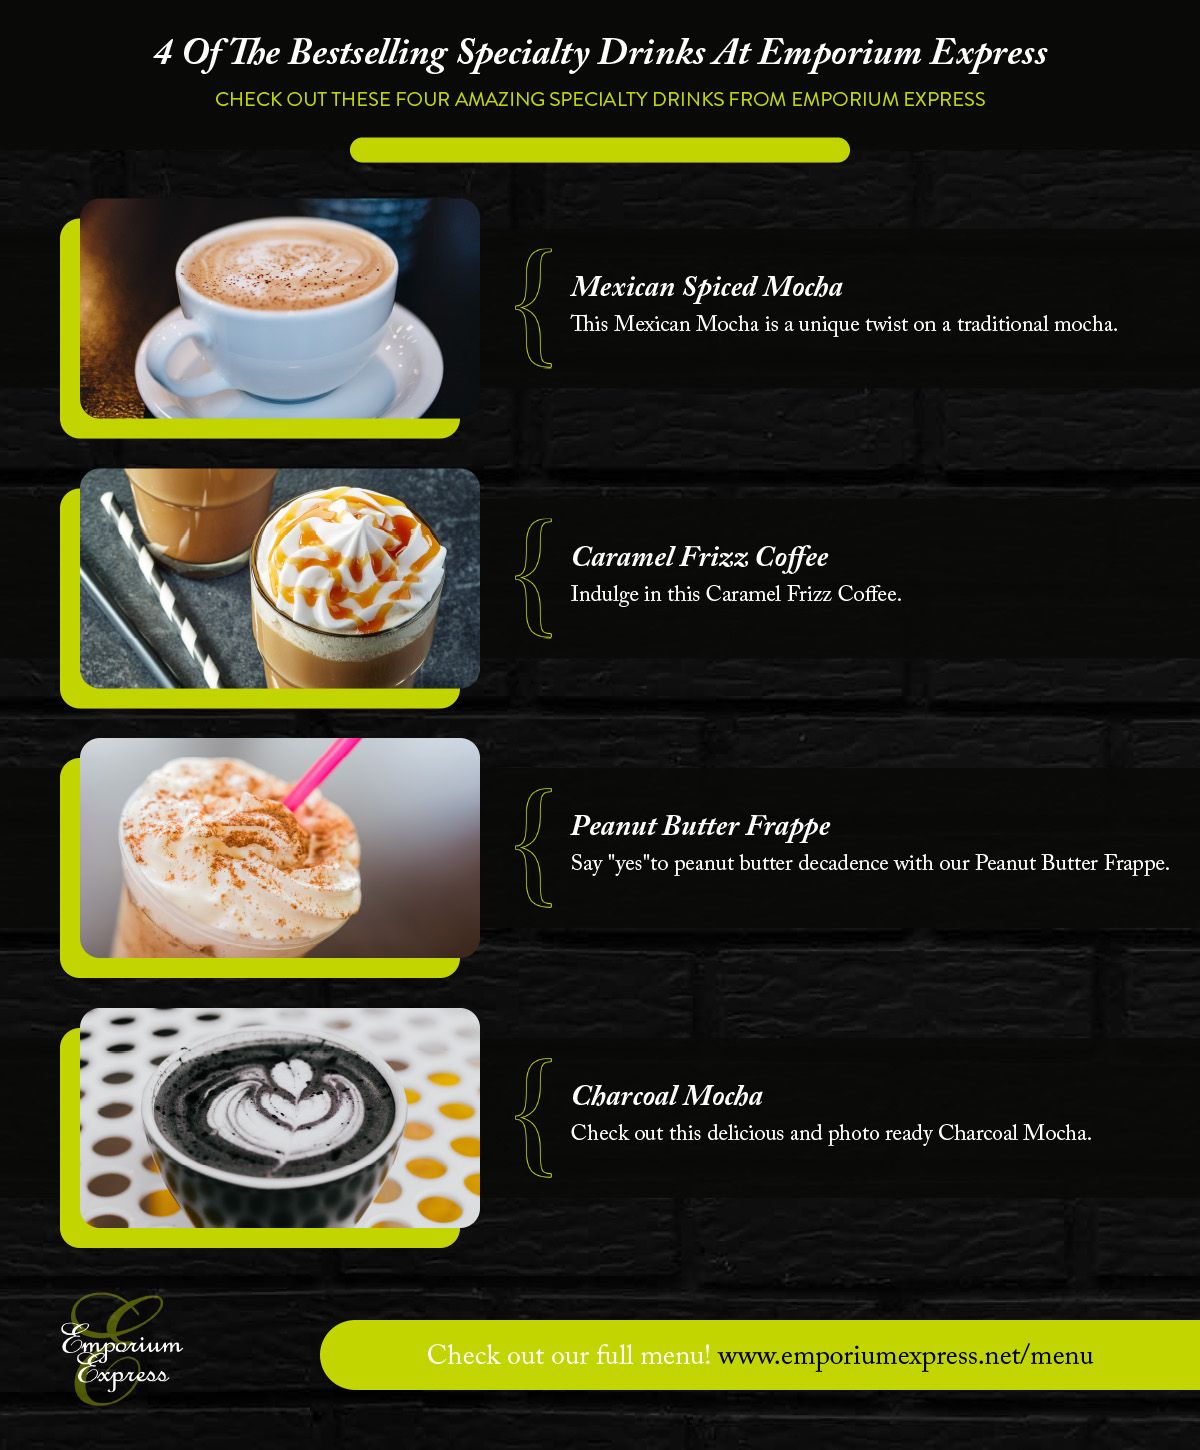 4 Of Our Bestselling Specialty Drinks BB Infographic